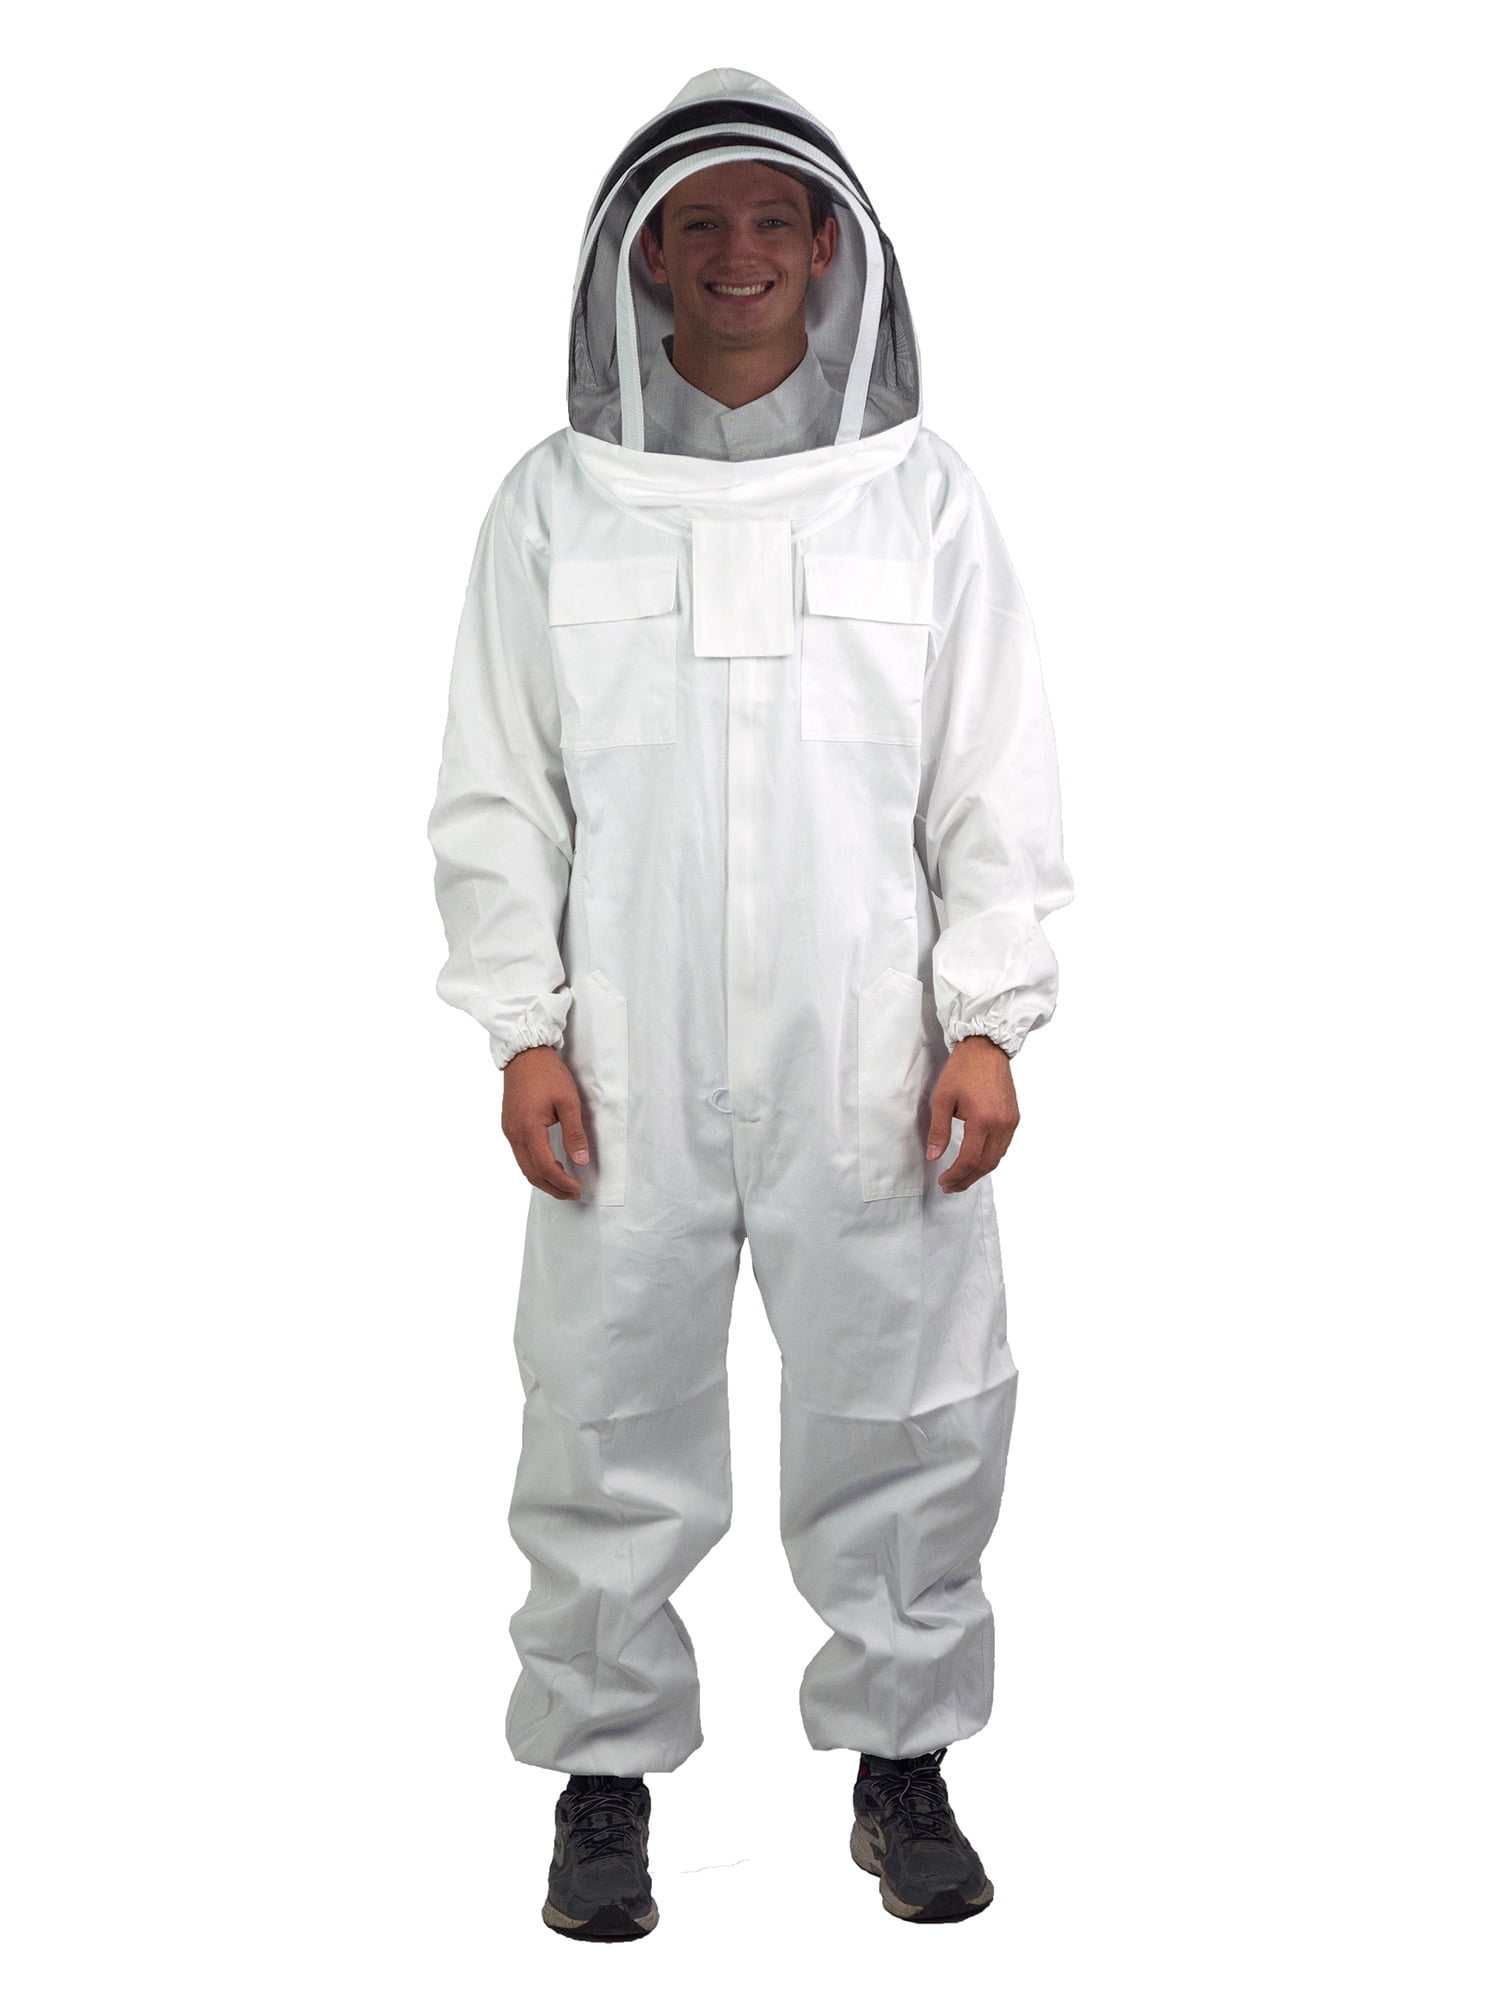 NEW size XXL Extra extra large Heavy Duty Full Beekeeping Suit Free shipping! 